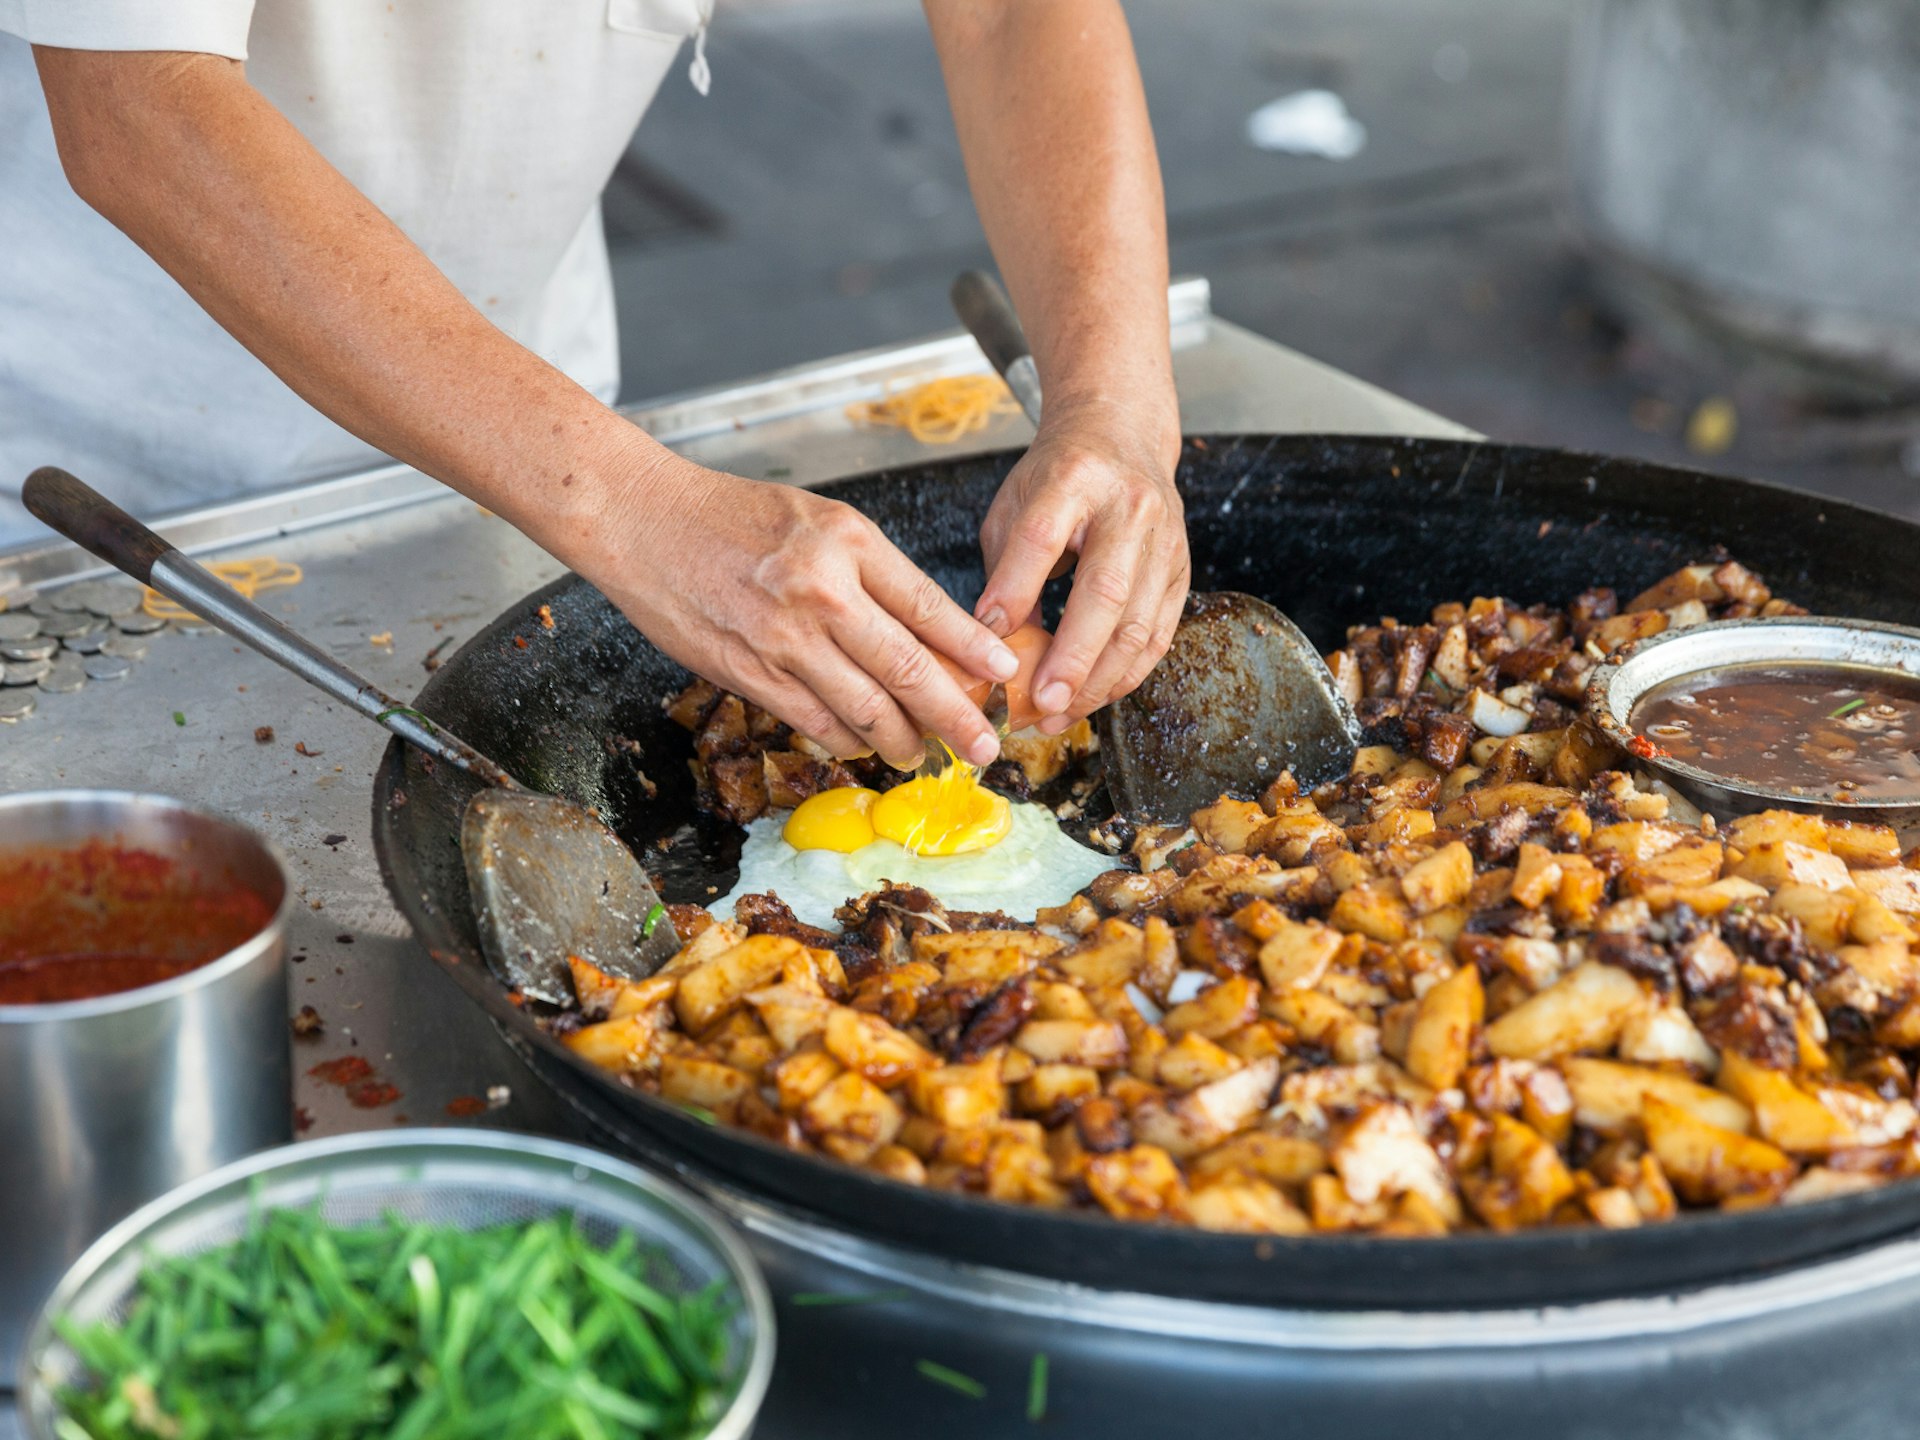 Street food vendor frying up potatoes and eggs